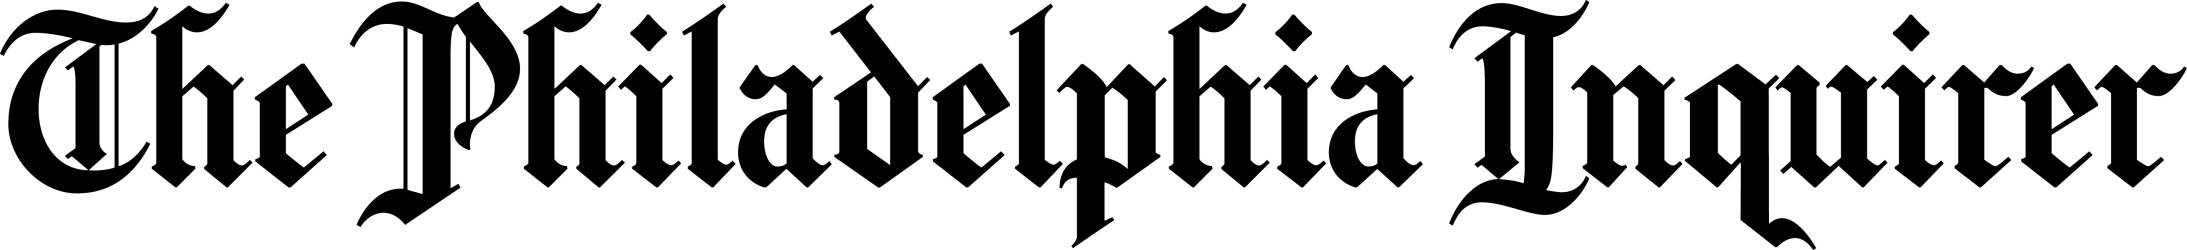 The Philadelphia Inquirer logo, text in a gothic font reads "the philadelphia inquirer"